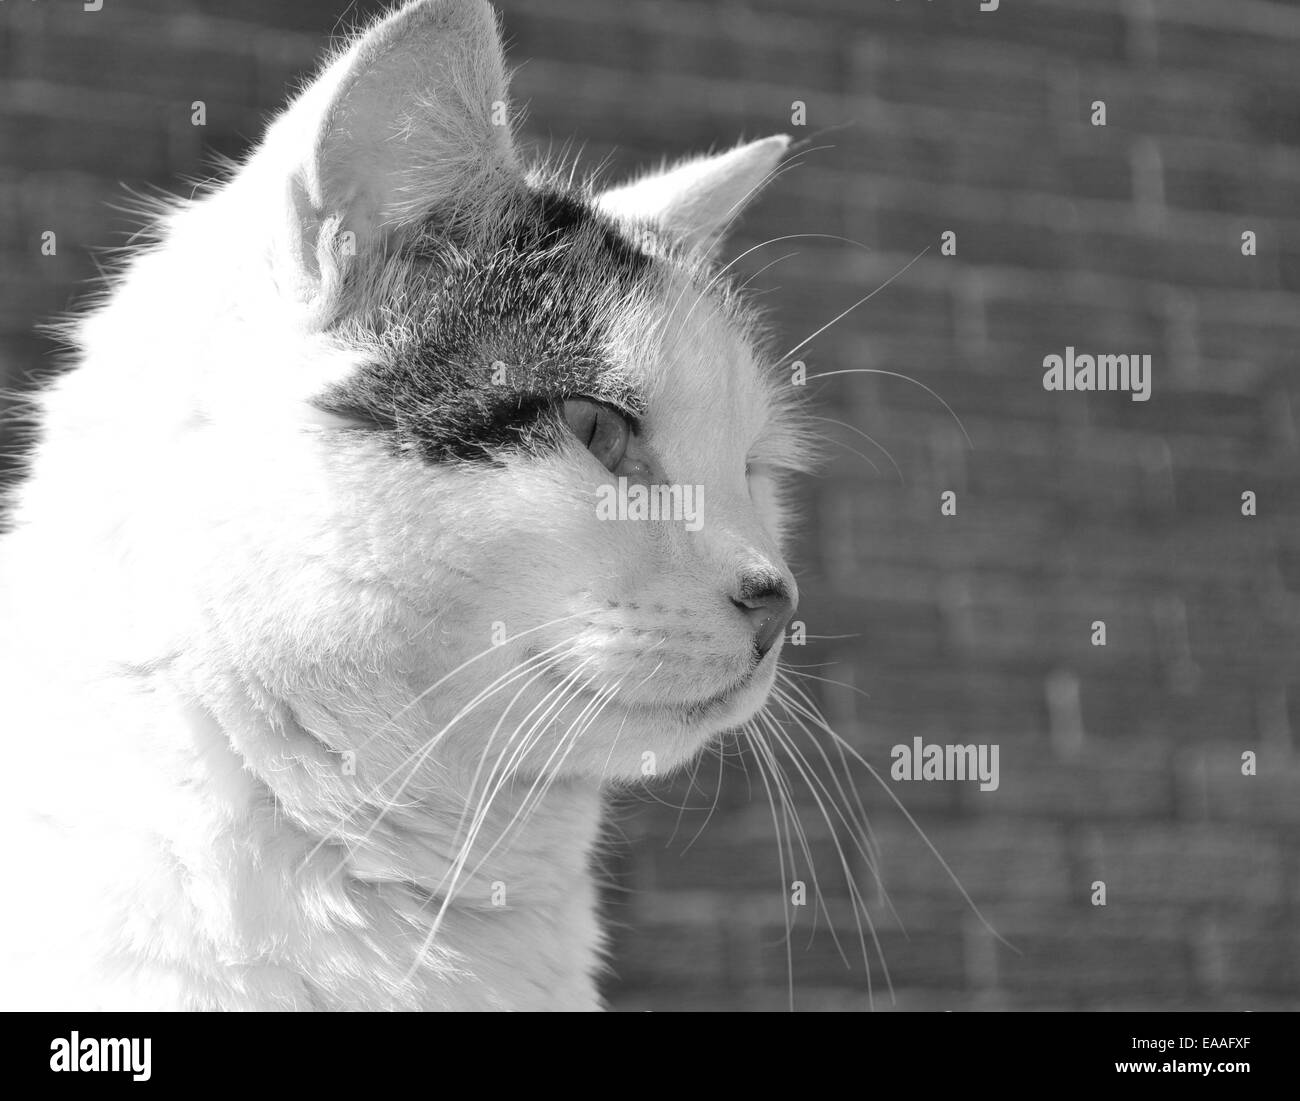 Black and white portrait of a cat Stock Photo